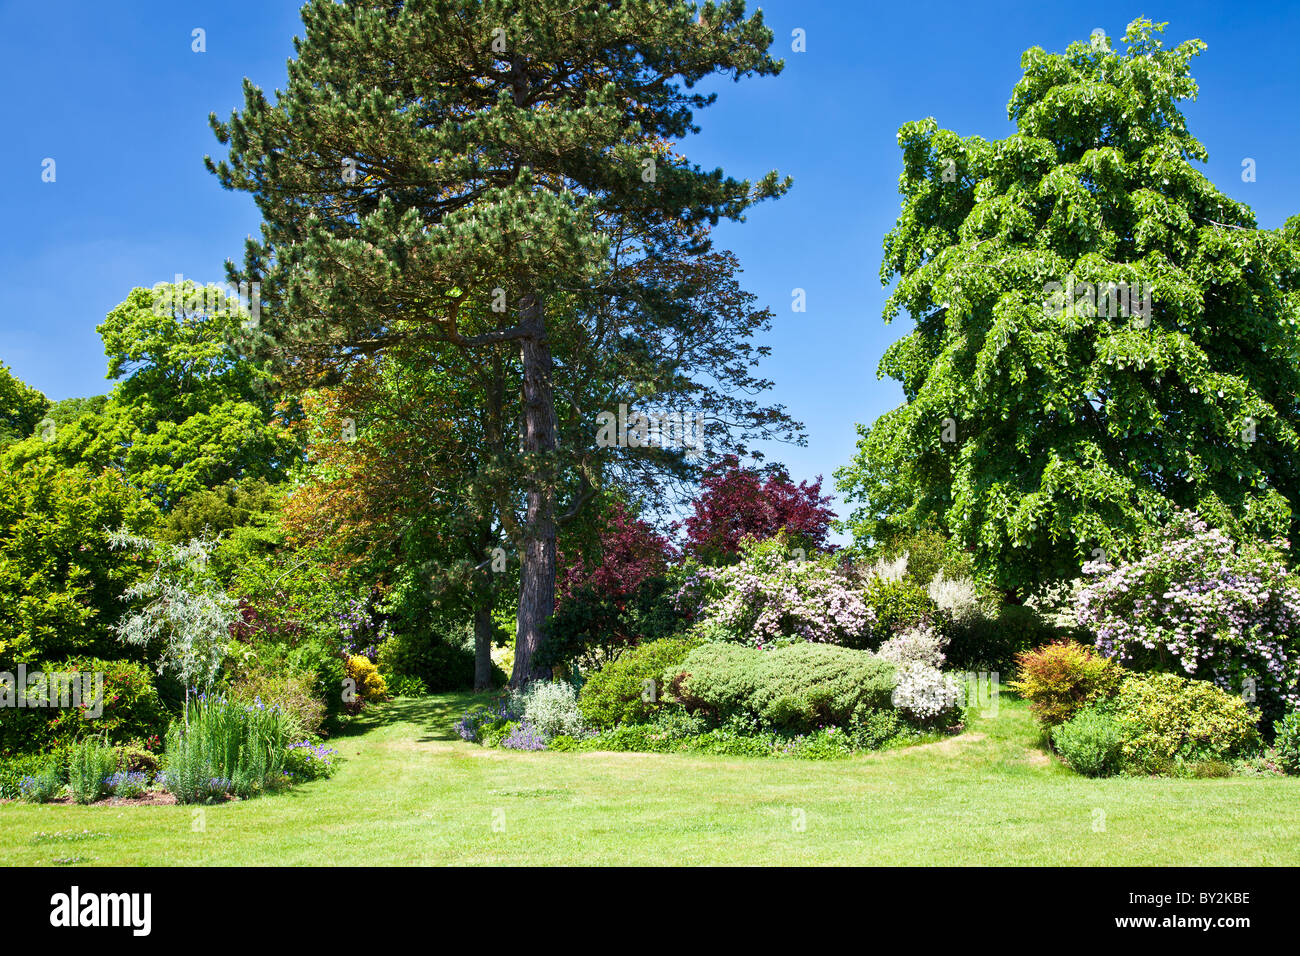 Shrub borders and trees in an English country garden in summer Stock Photo